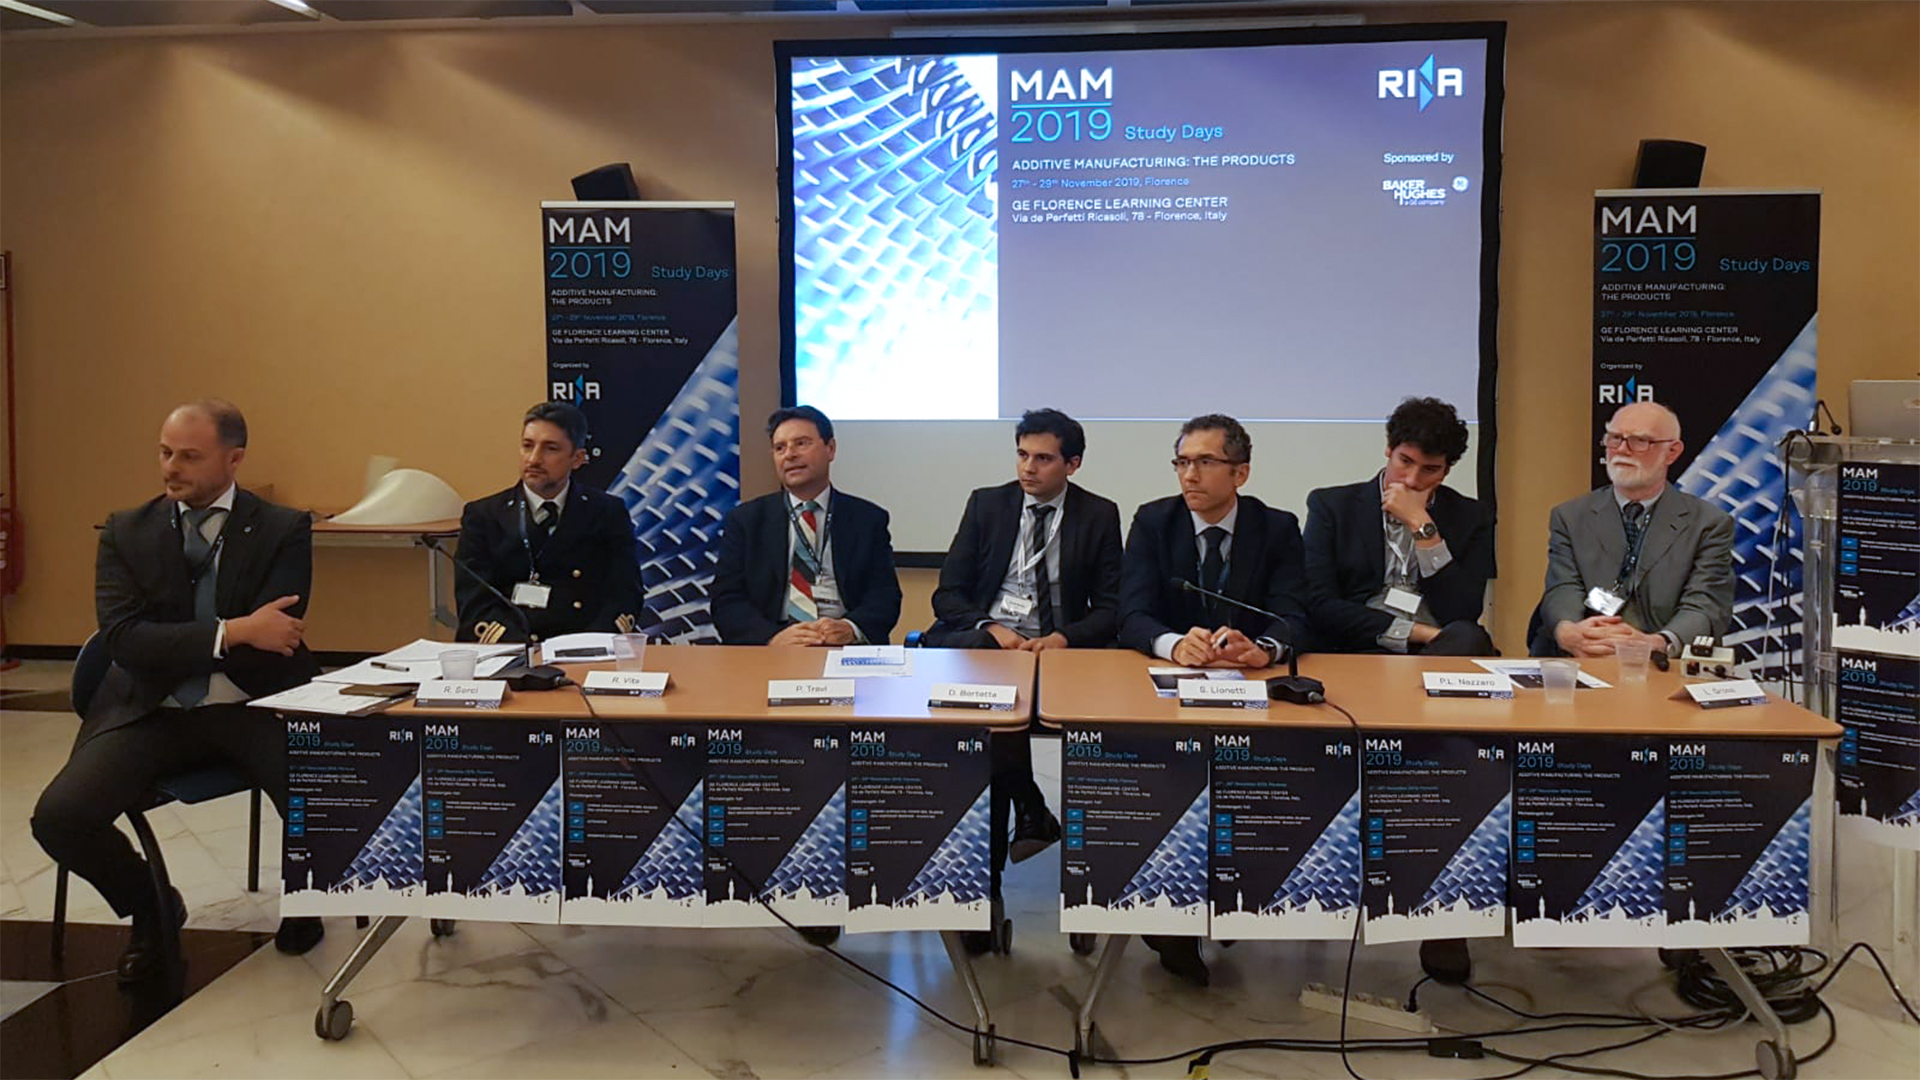 2019 MAM in Florence